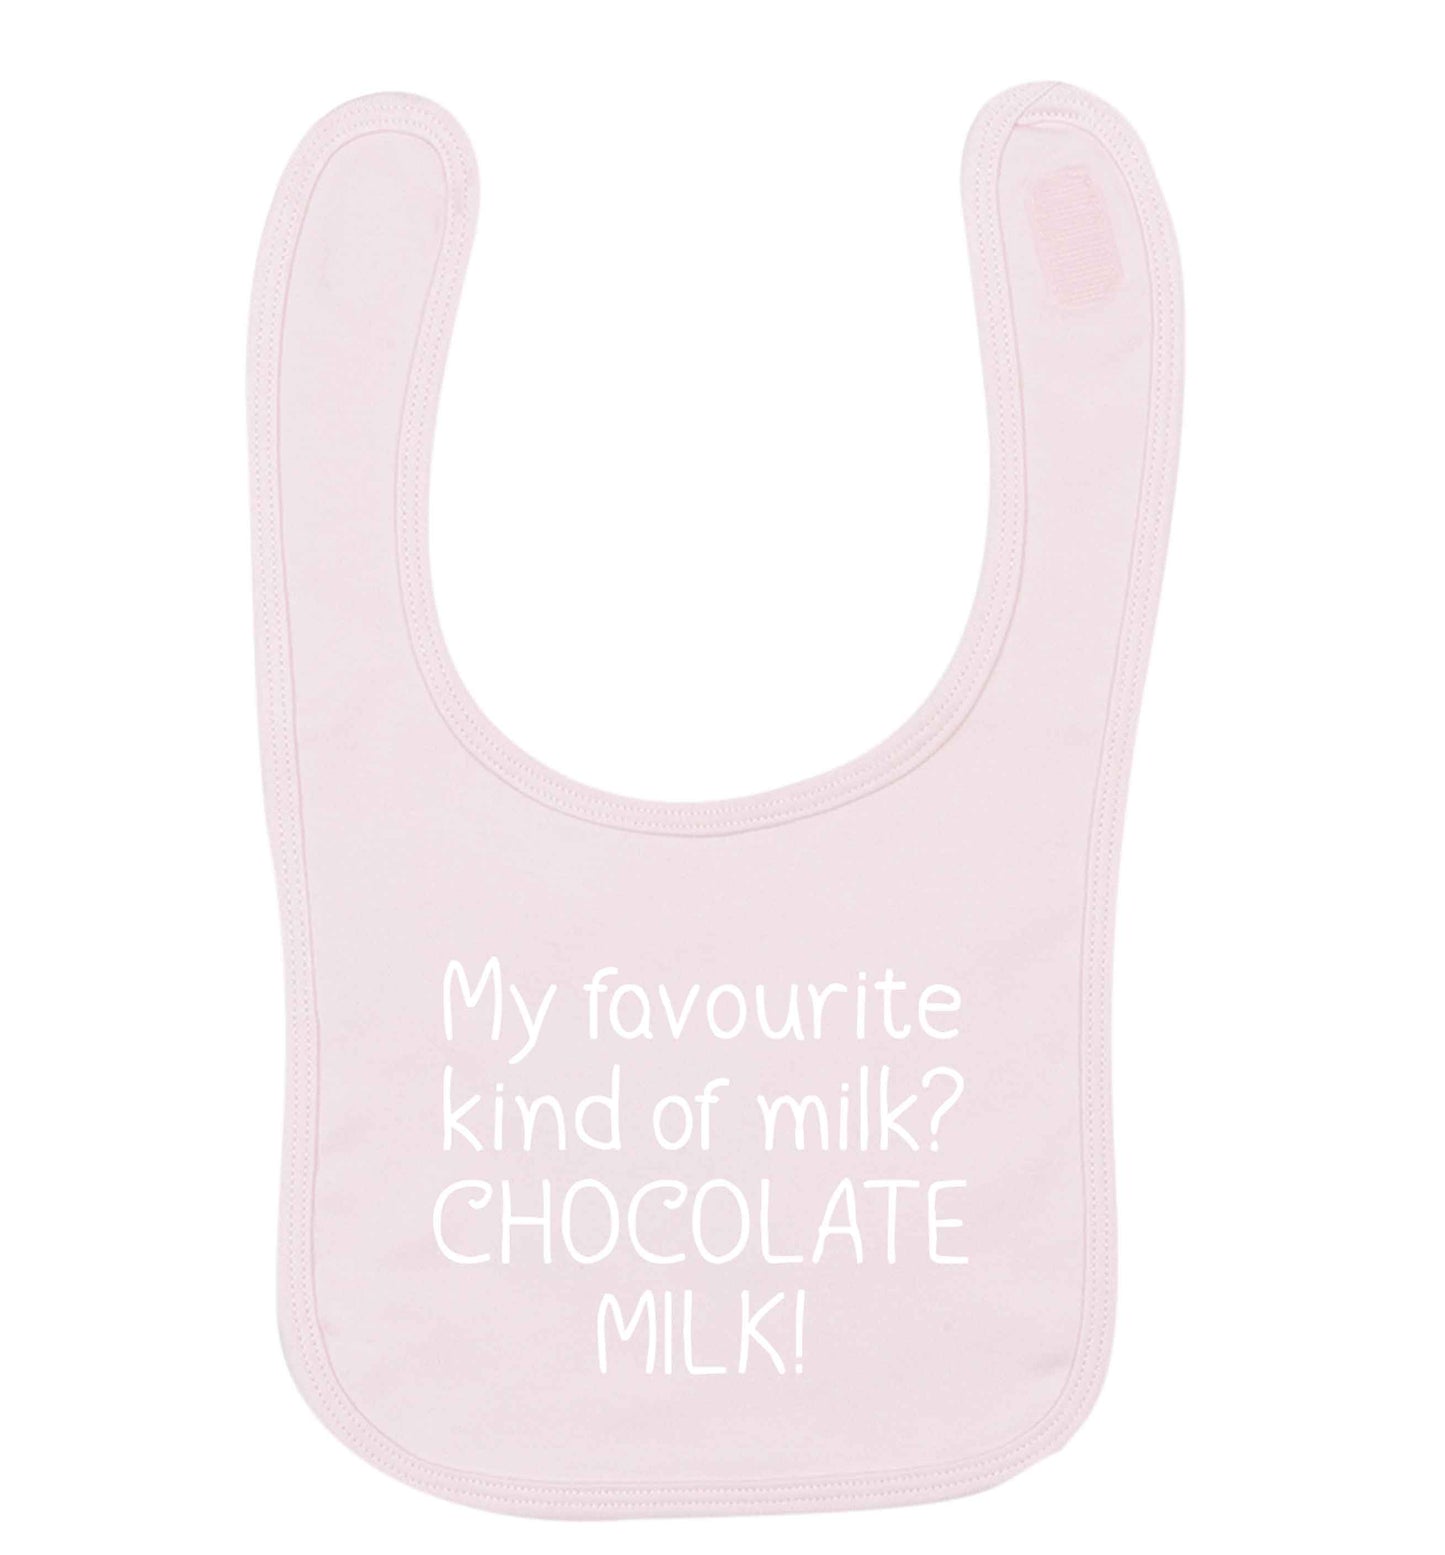 funny gift for a chocaholic! My favourite kind of milk? Chocolate milk! pale pink baby bib